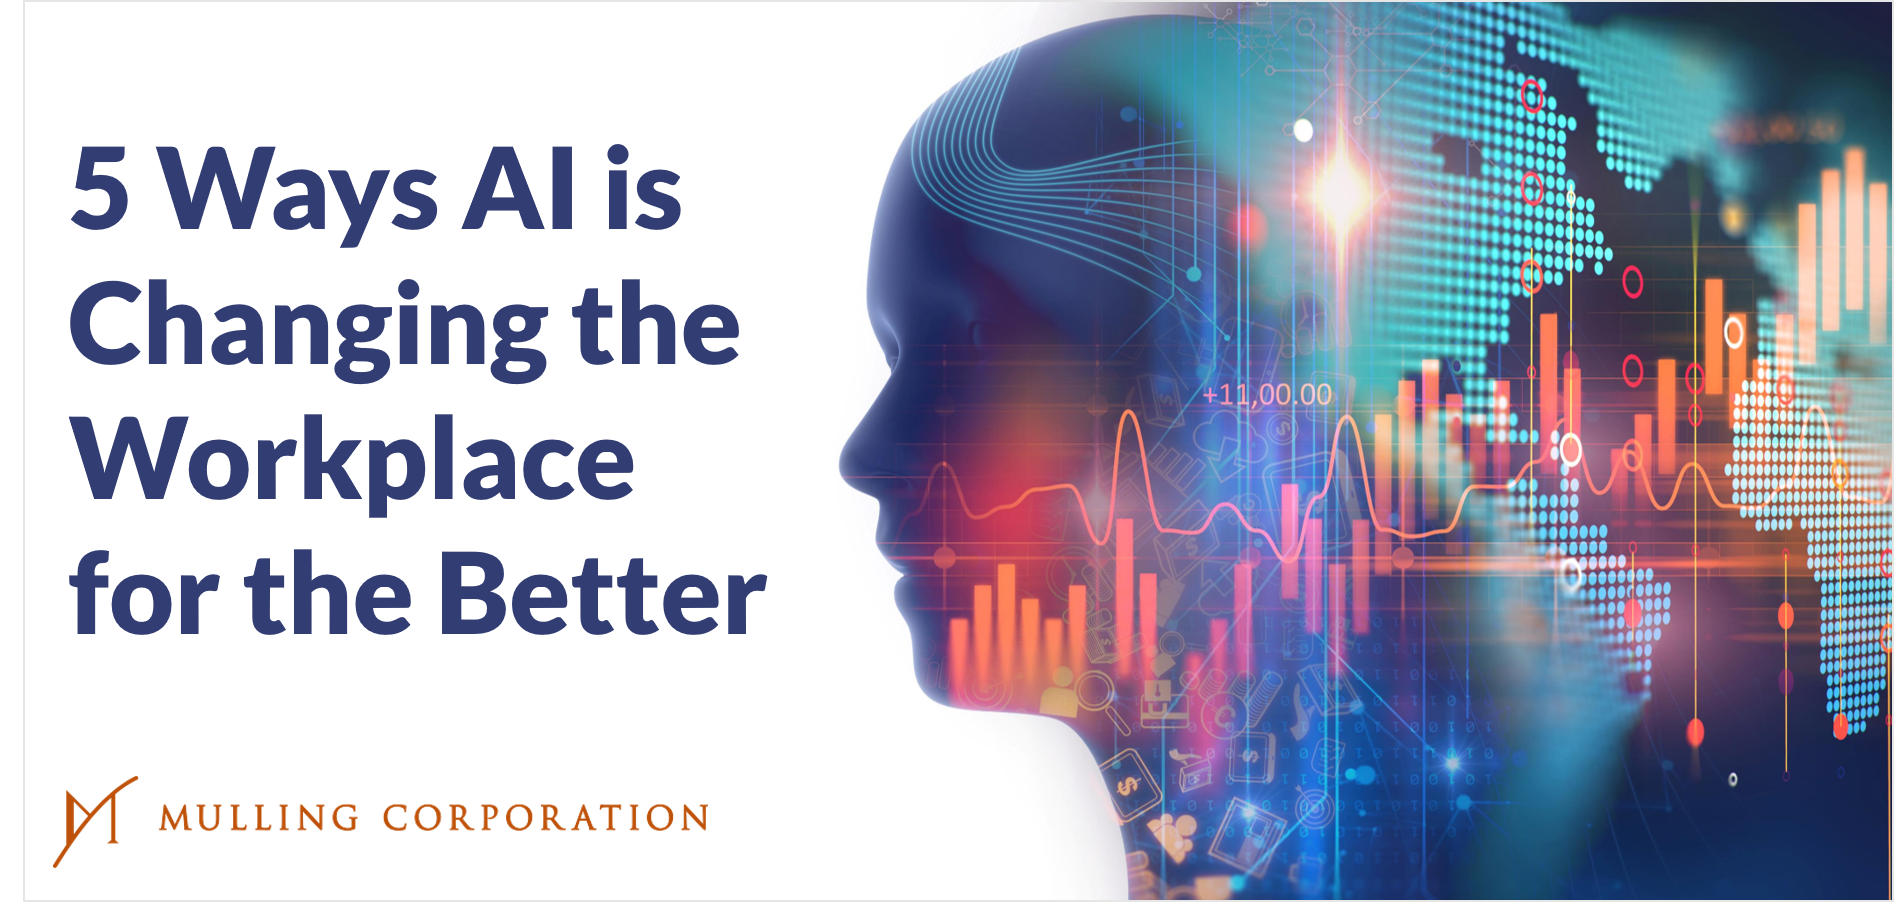 5 Ways AI is Changing the Workplace for the Better